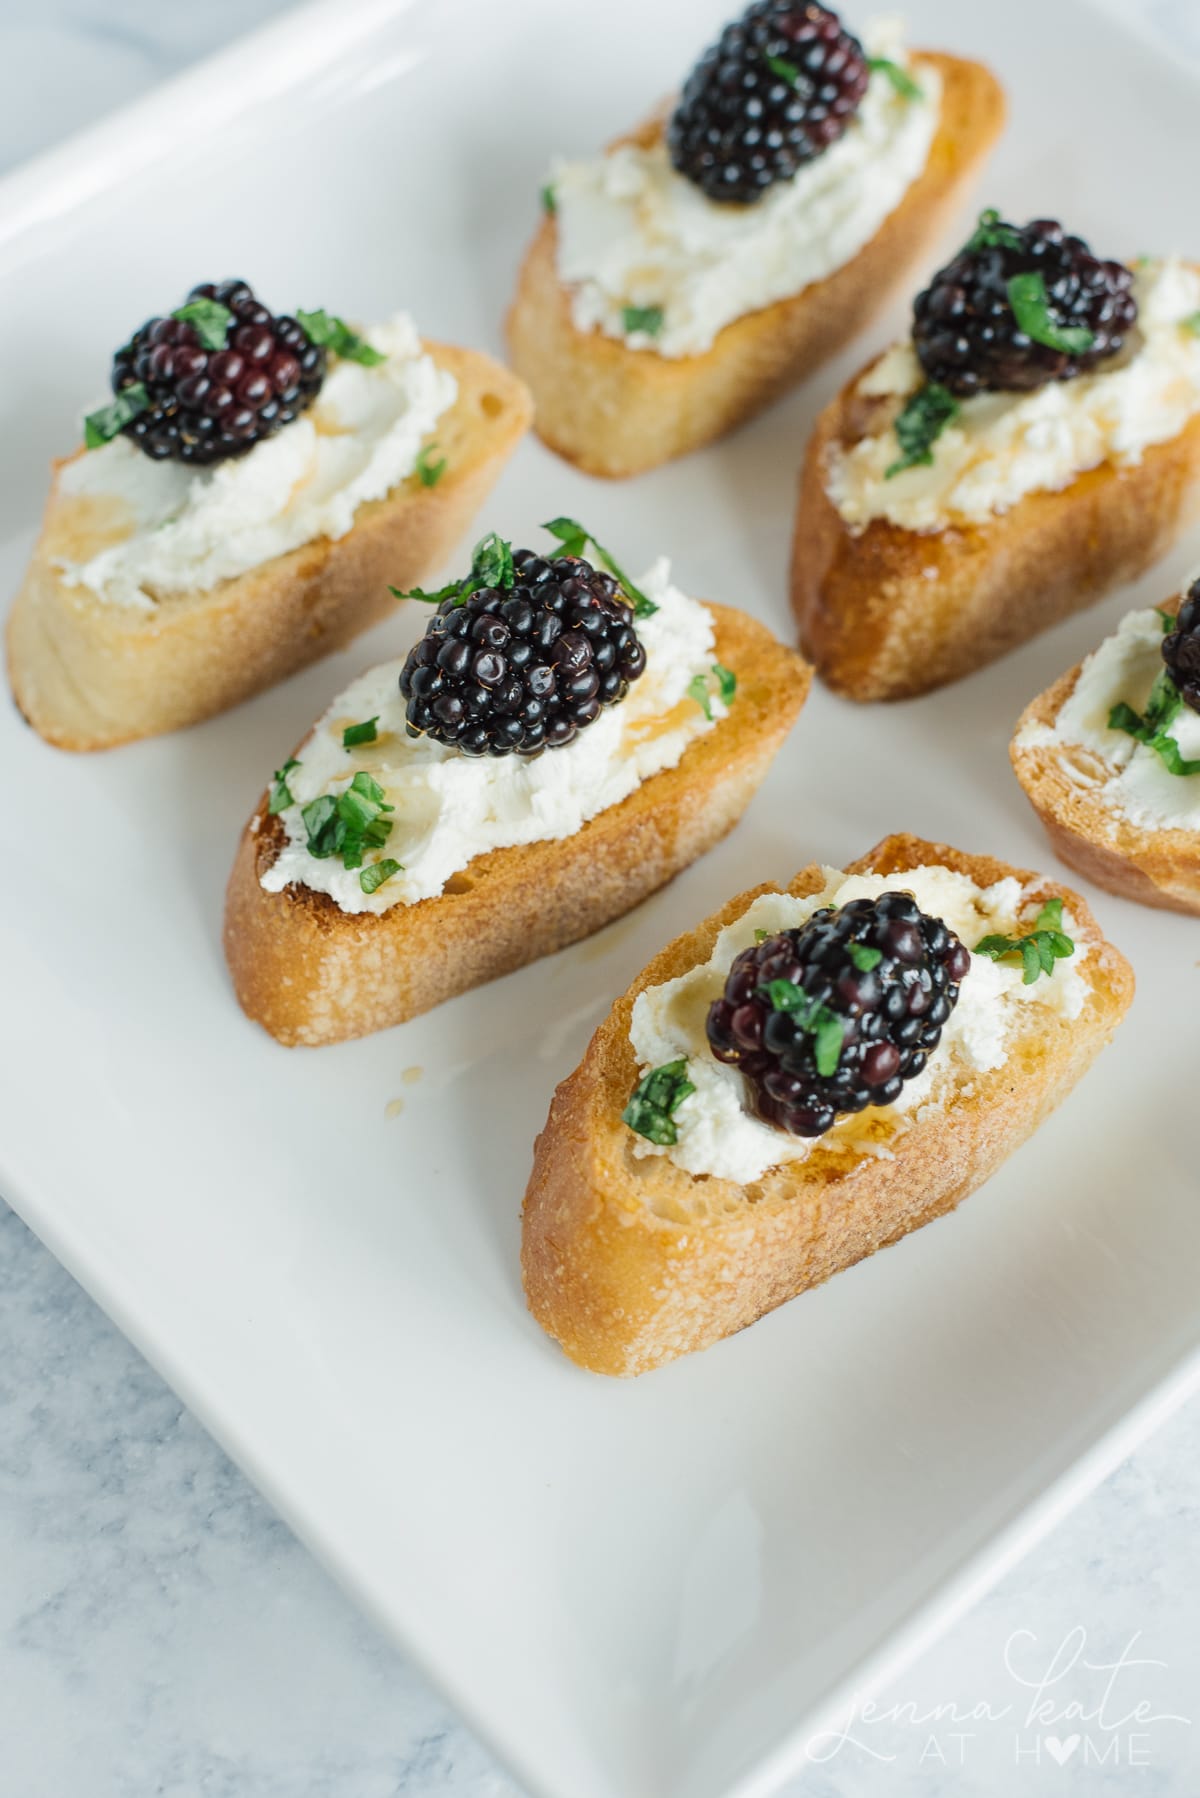 Easy late summer or early fall appetizers with goat cheese and blackberries